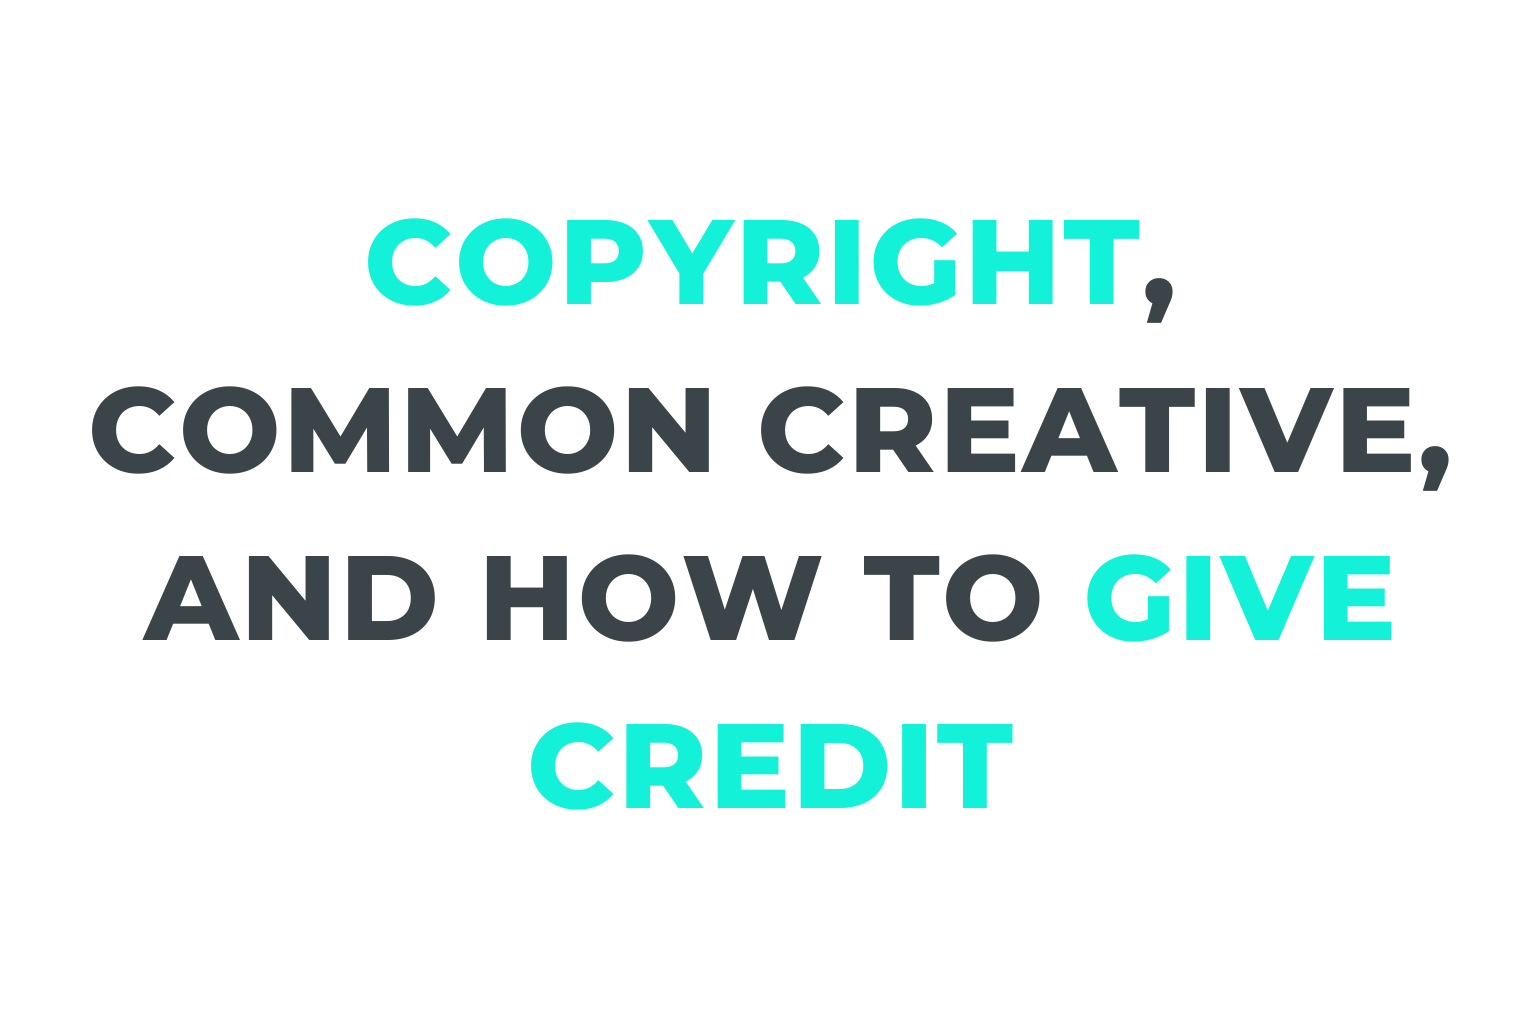 Copyright, Common Creative, Give Credit